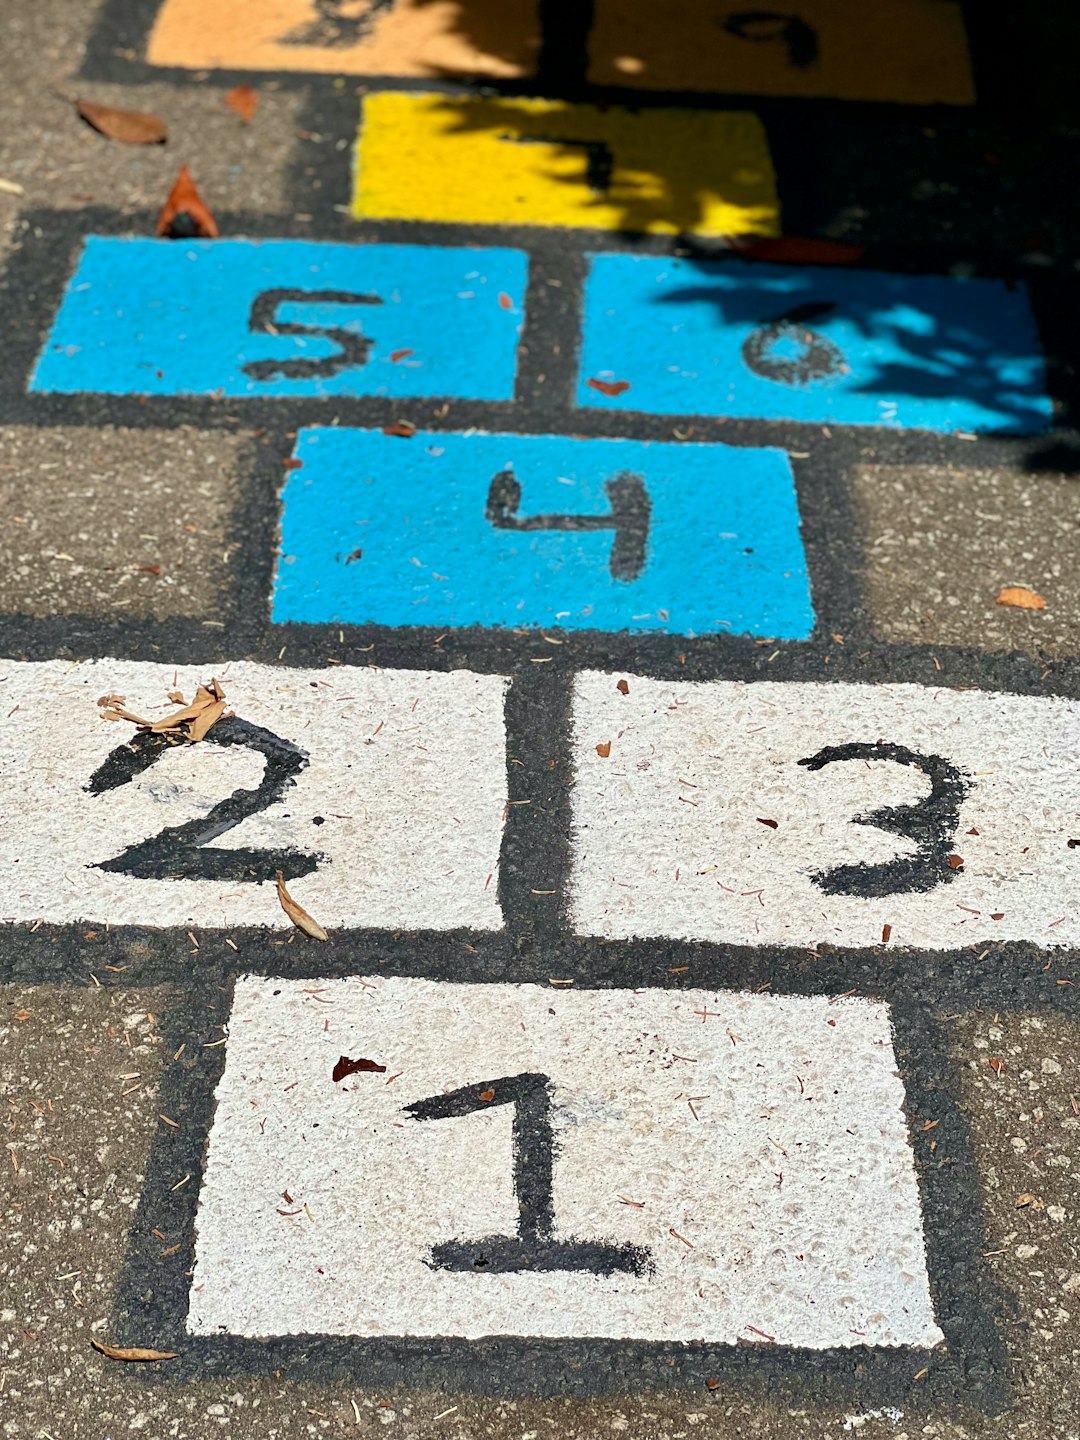 How Hopscotch Can Help Your Child Develop Number Sense